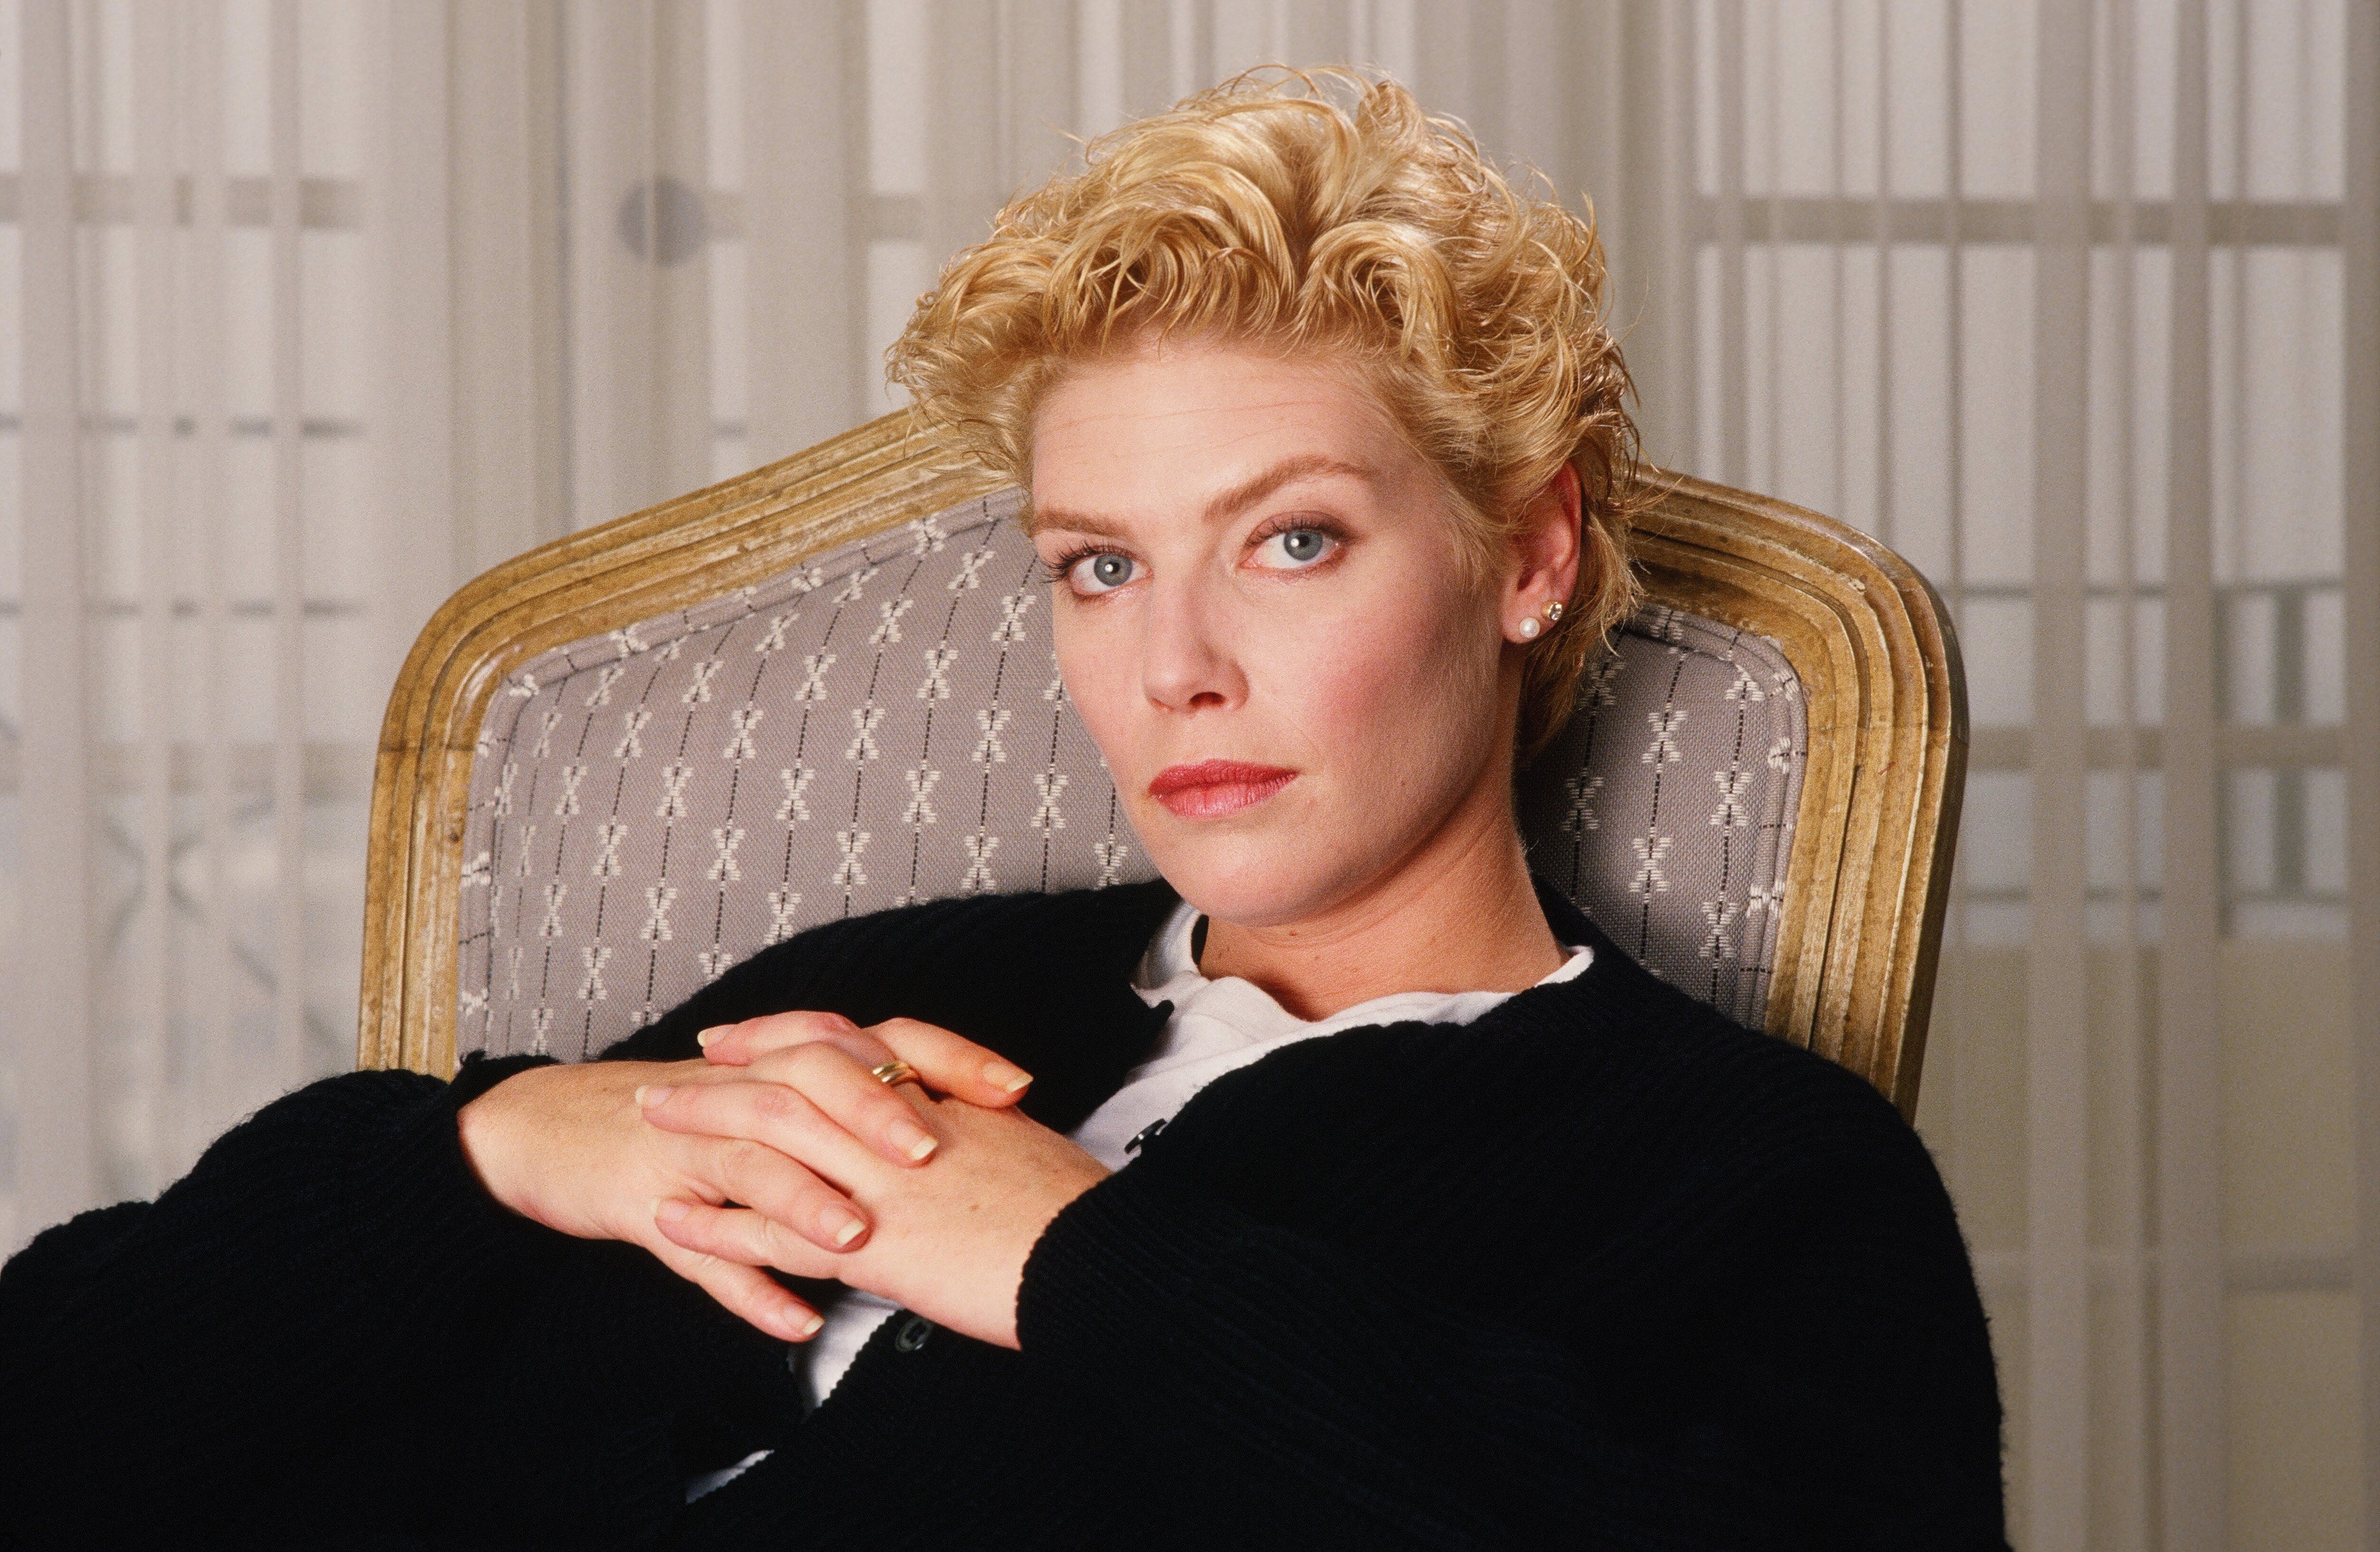 Kelly McGillis poses during a portrait photo session in 1988 in Beverly Hills, California | Source: Getty Images